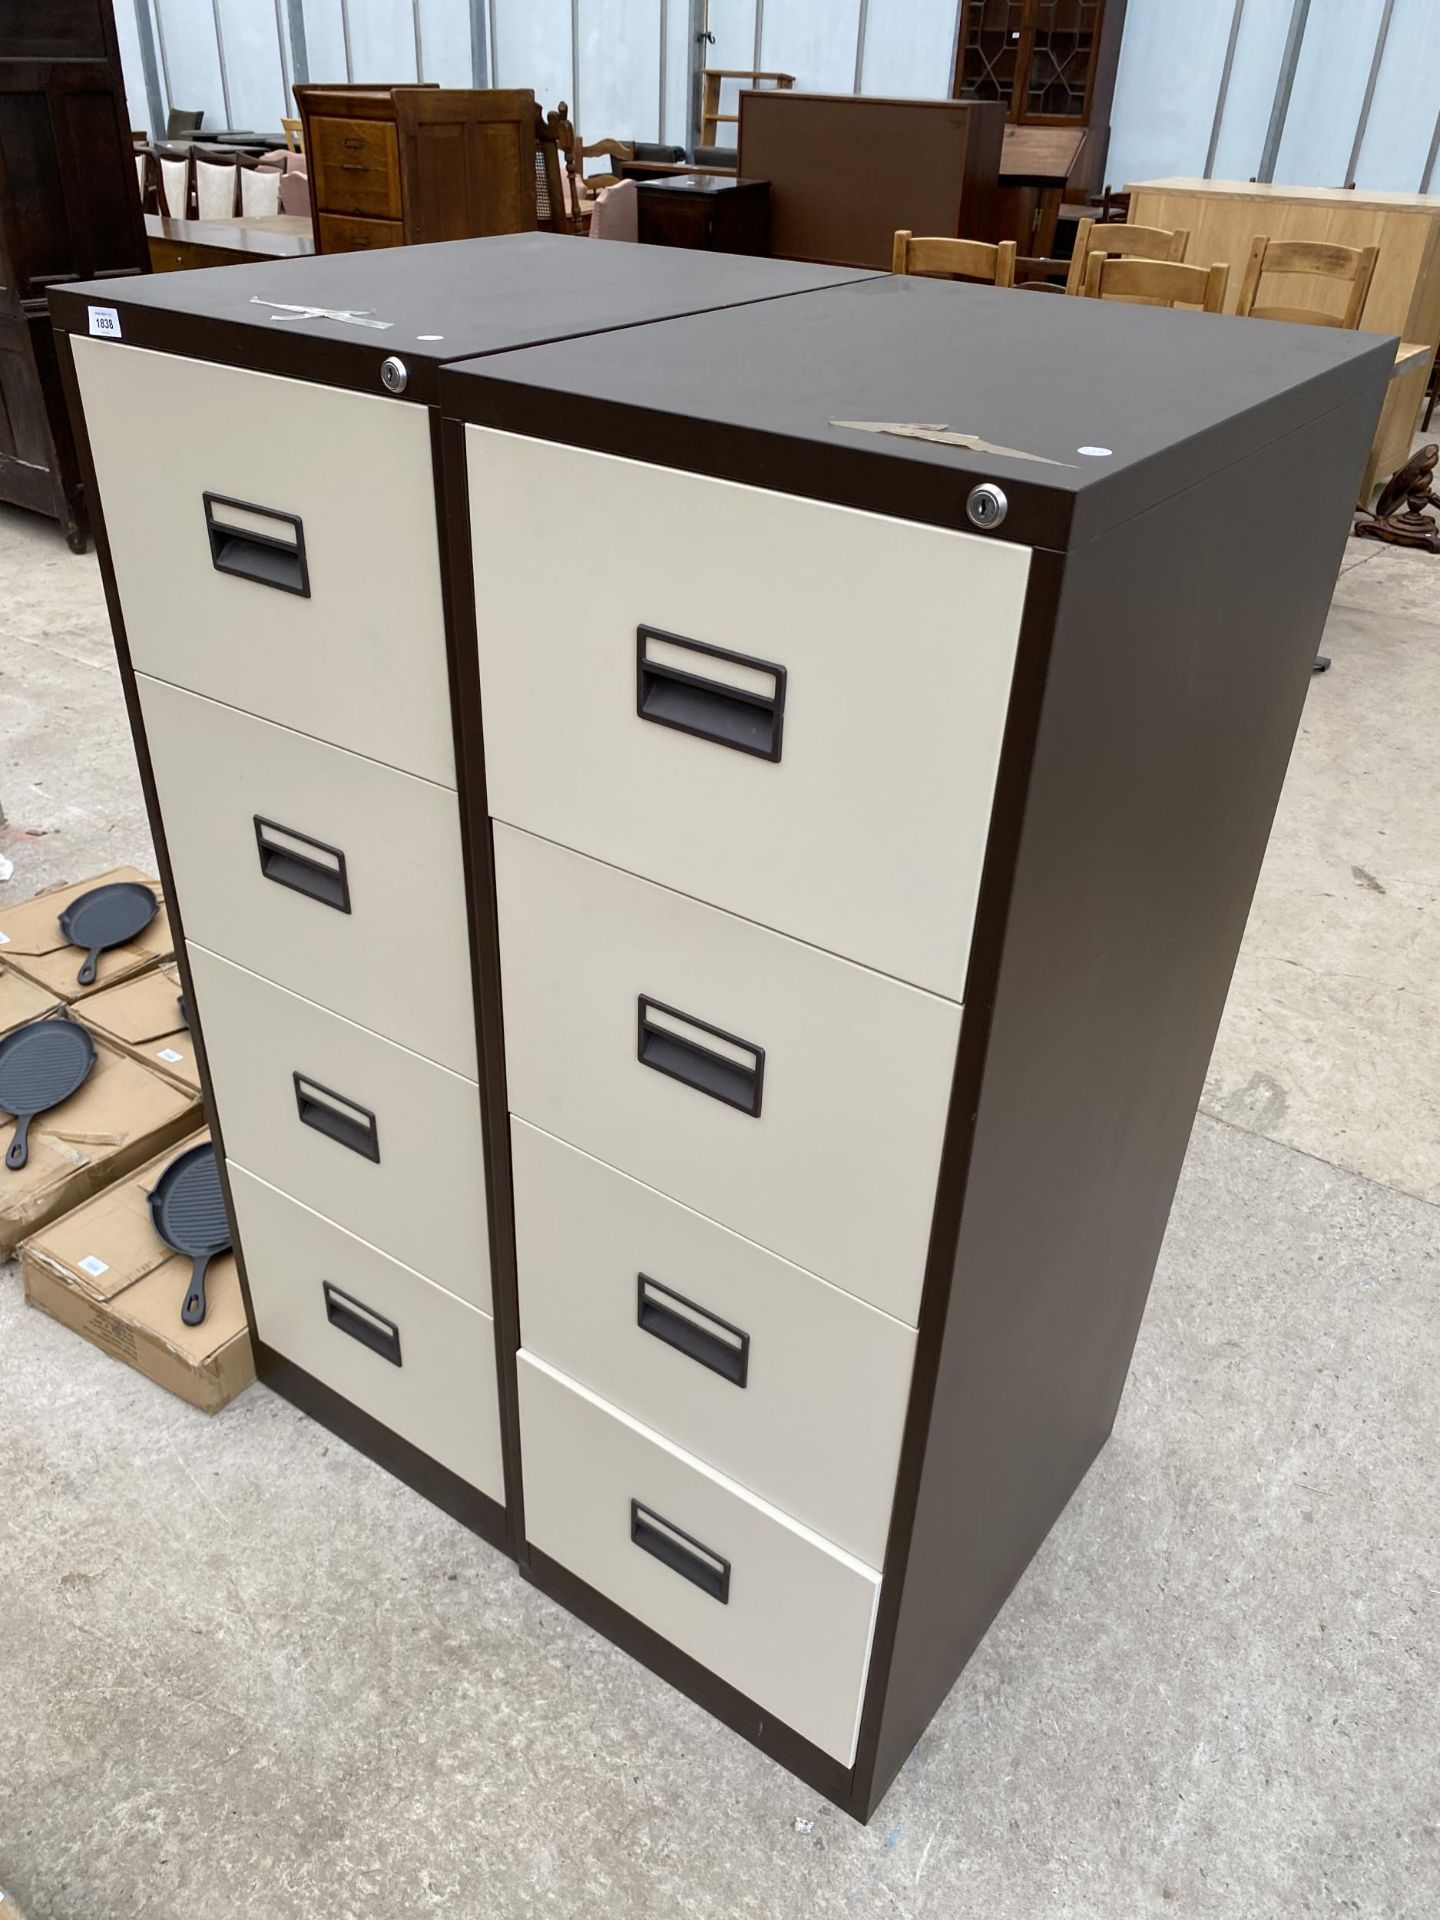 A PAIR OF FOUR DRAWER METAL FILING CABINETS